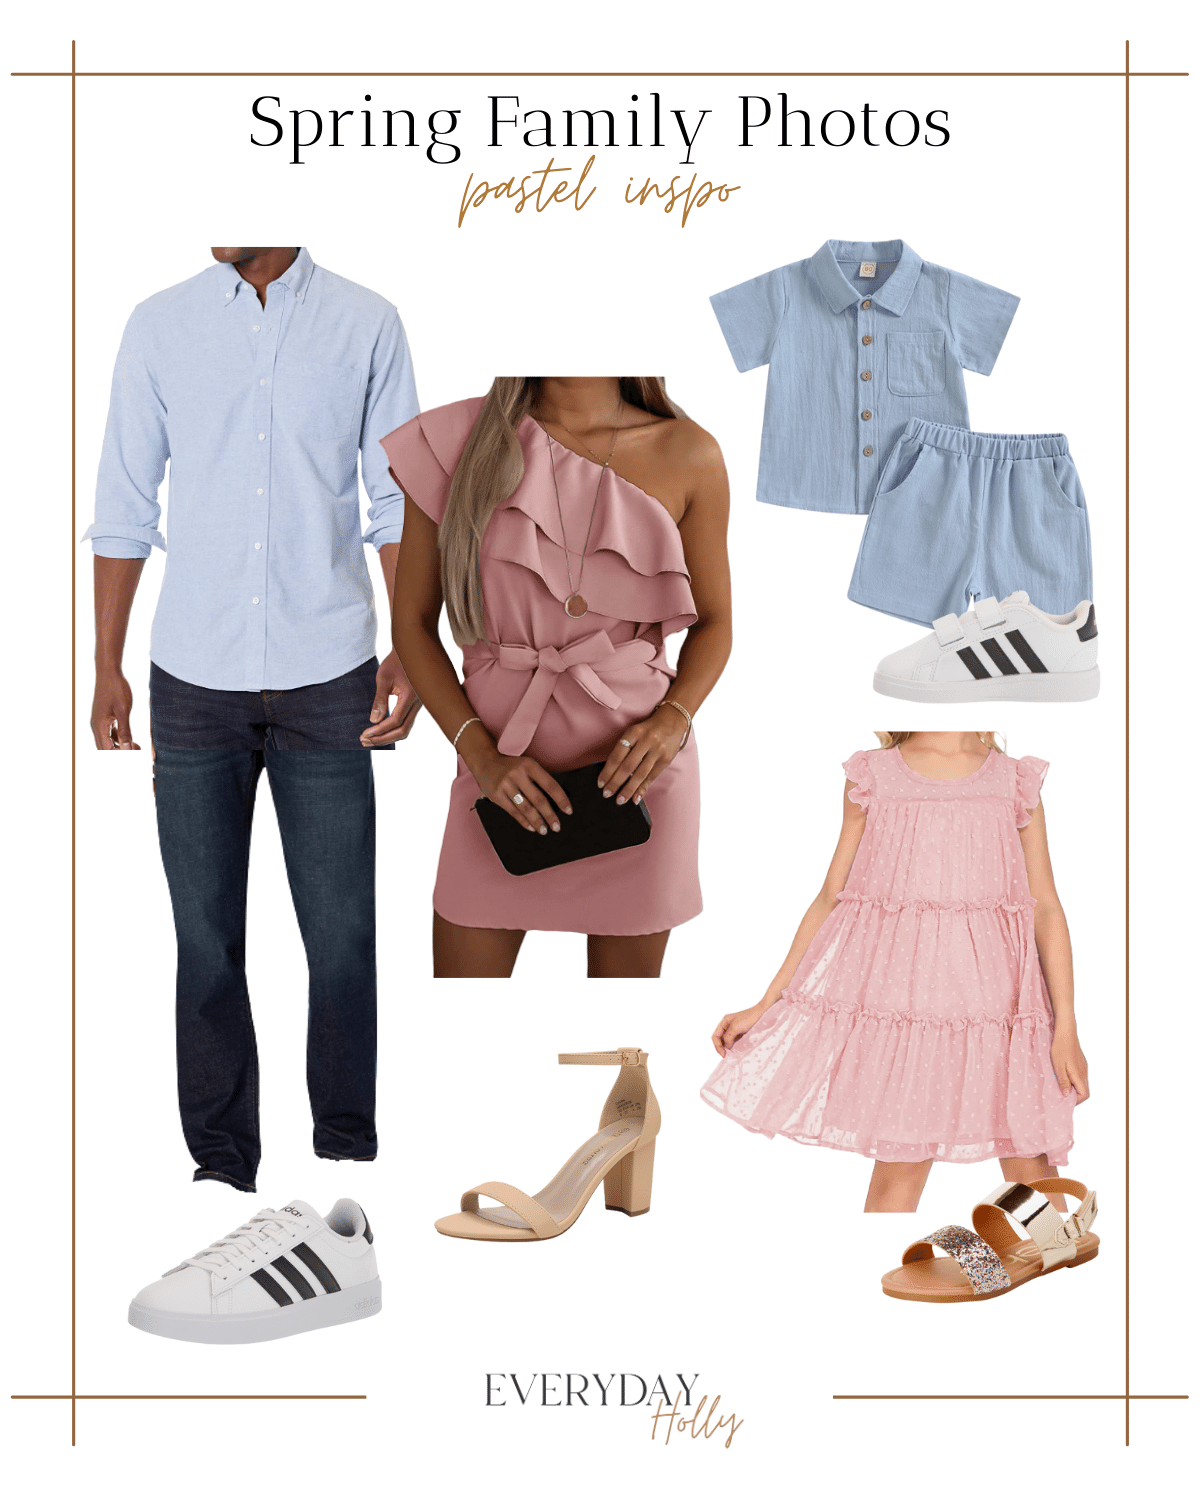 pastel outfit inspo, mens light blue button down, family photos, mens dark blue jeans, mens adidas sneakers, pink one shoulder dress, girls pink dress, tan strap heels, light blue boys outfit, boys sneakers 